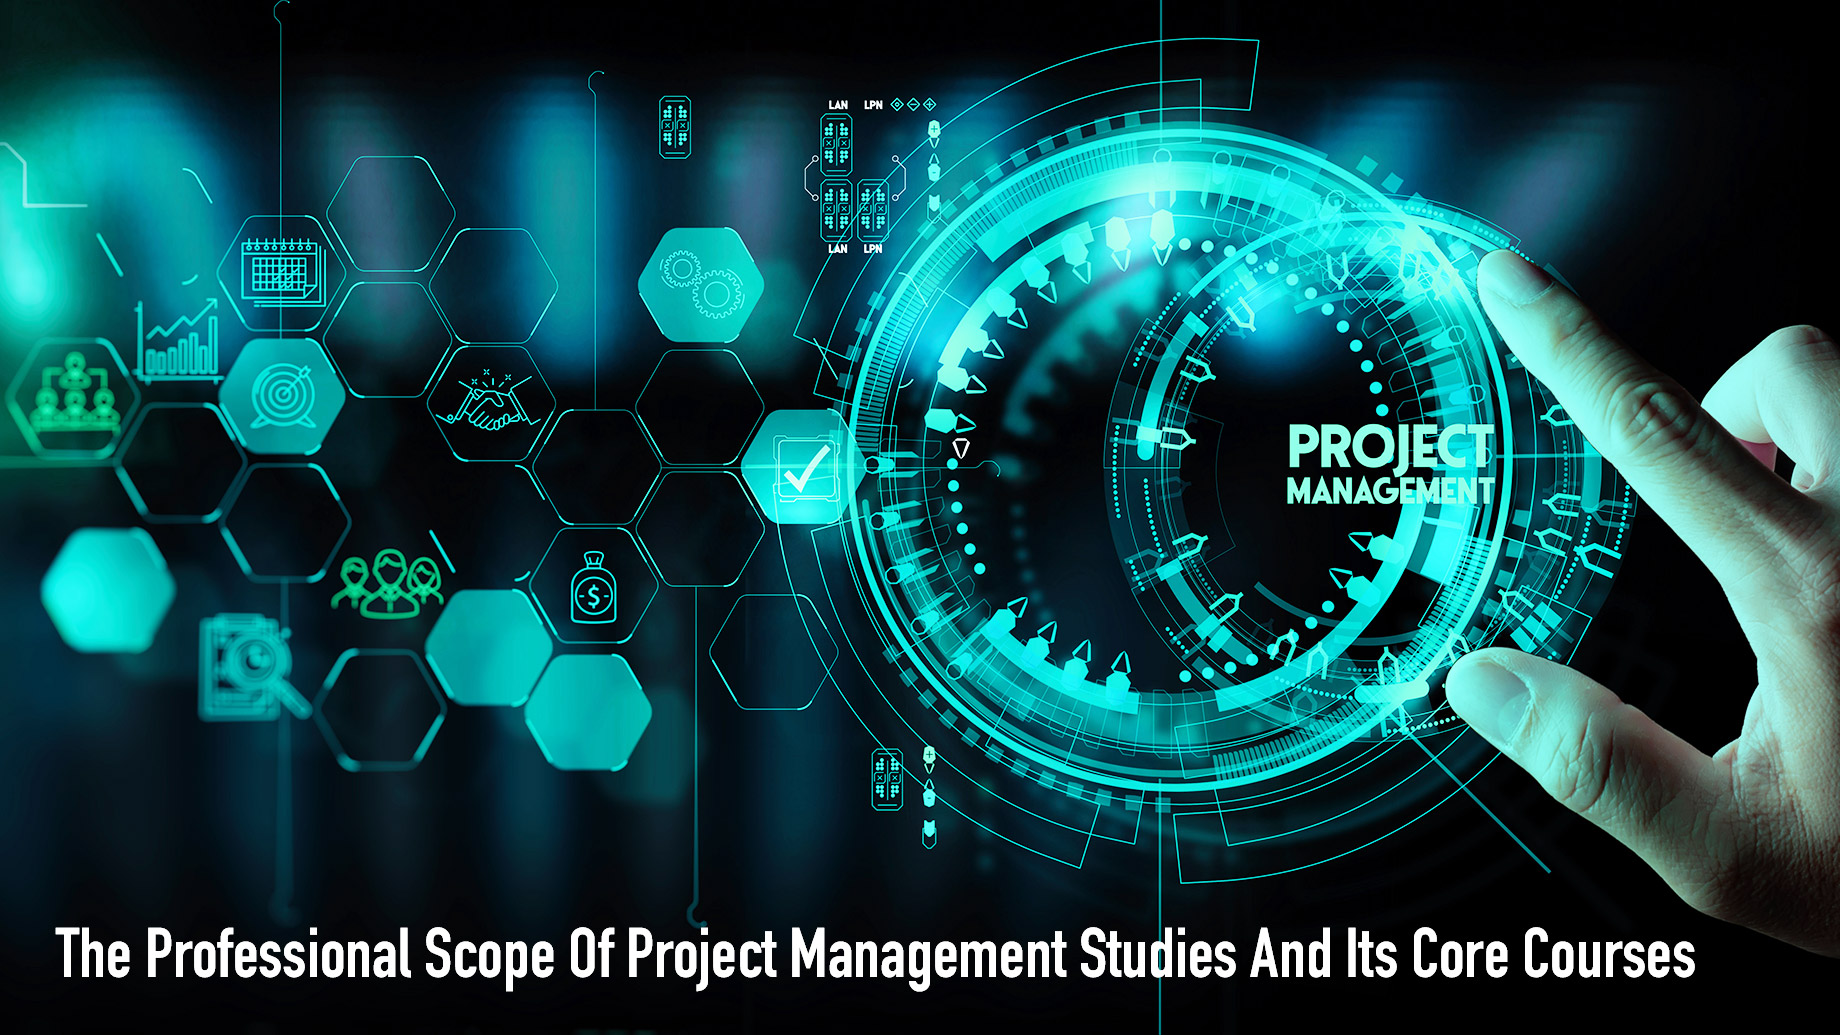 The Professional Scope Of Project Management Studies And Its Core Courses